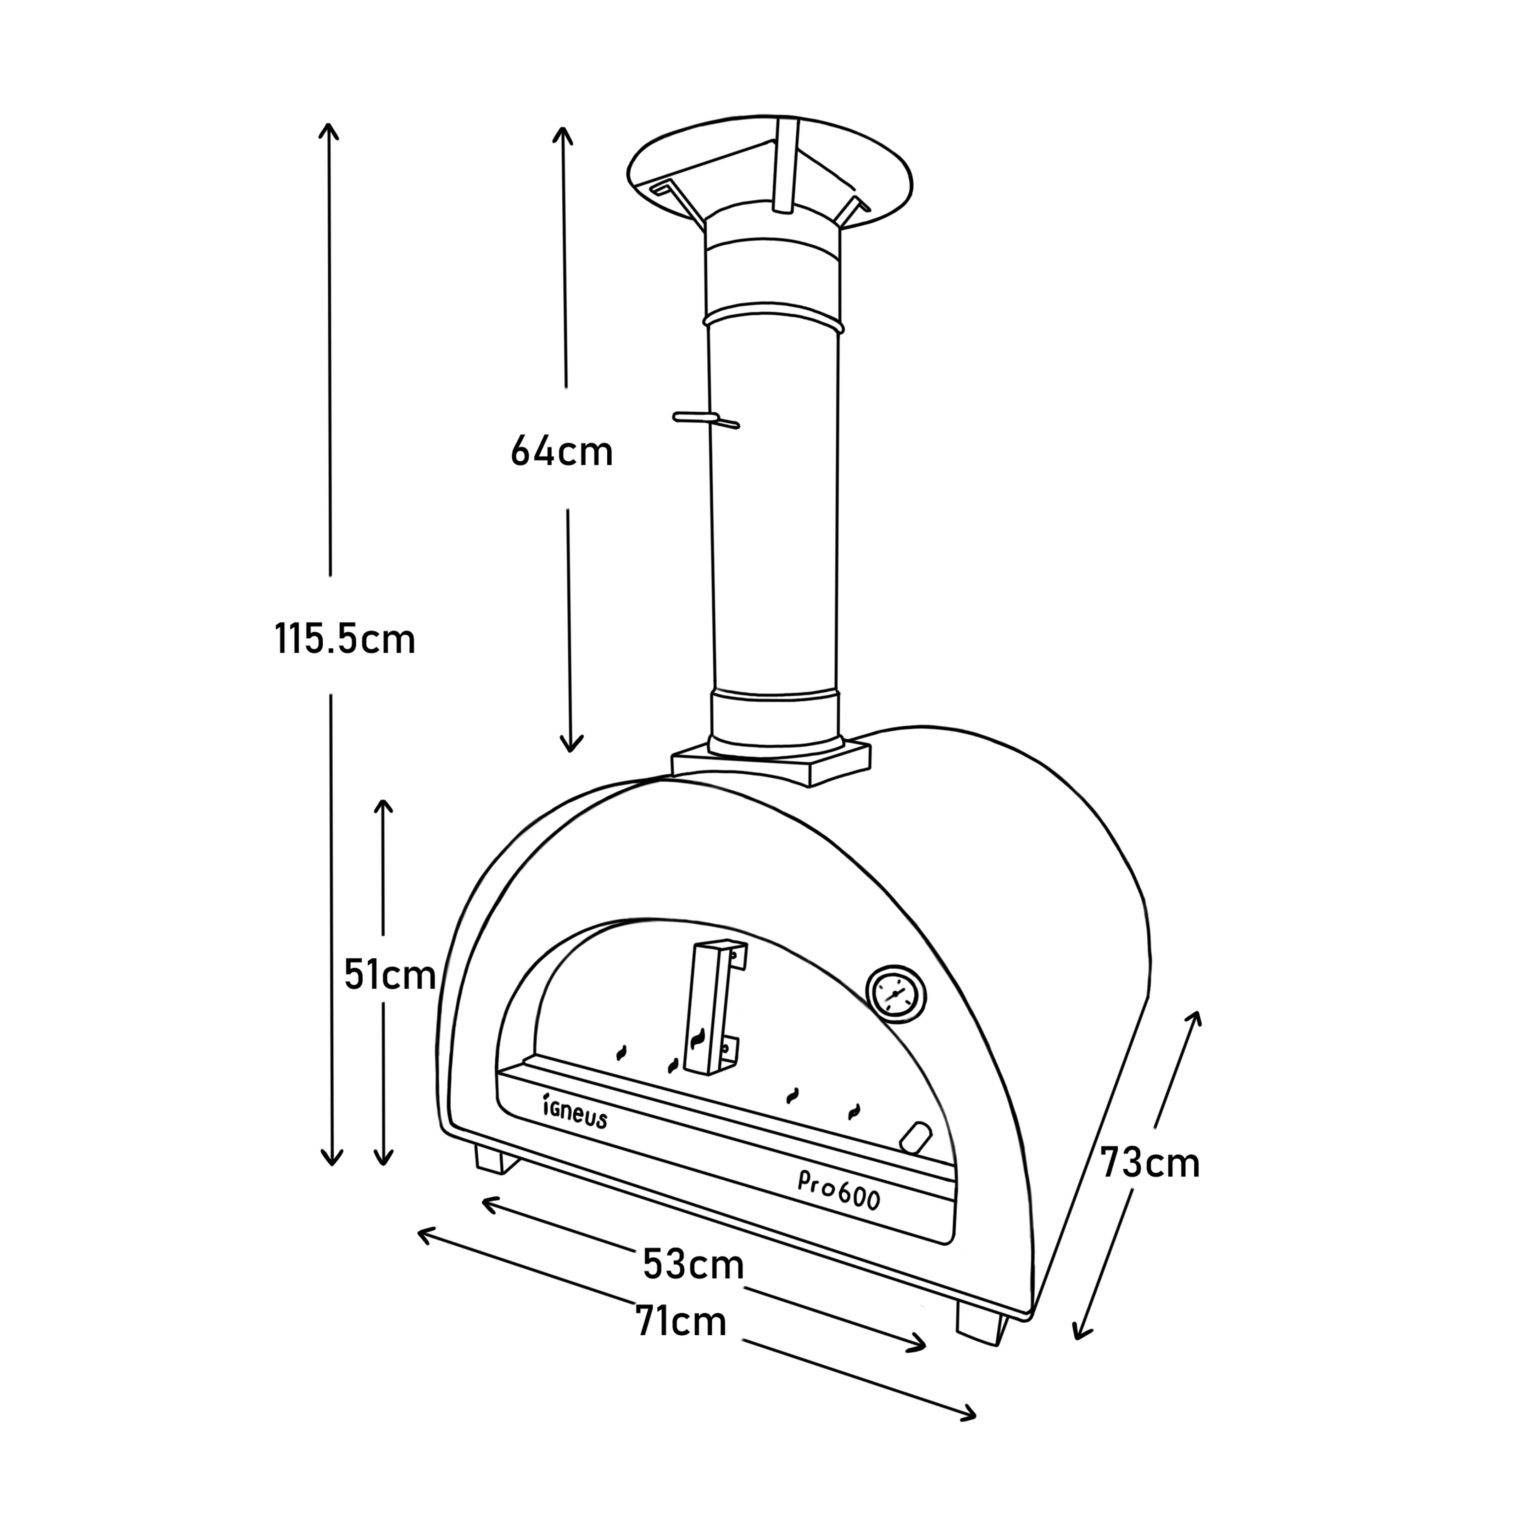 Igneus Pro 600 wood fired pizza oven - dimensions and measurements